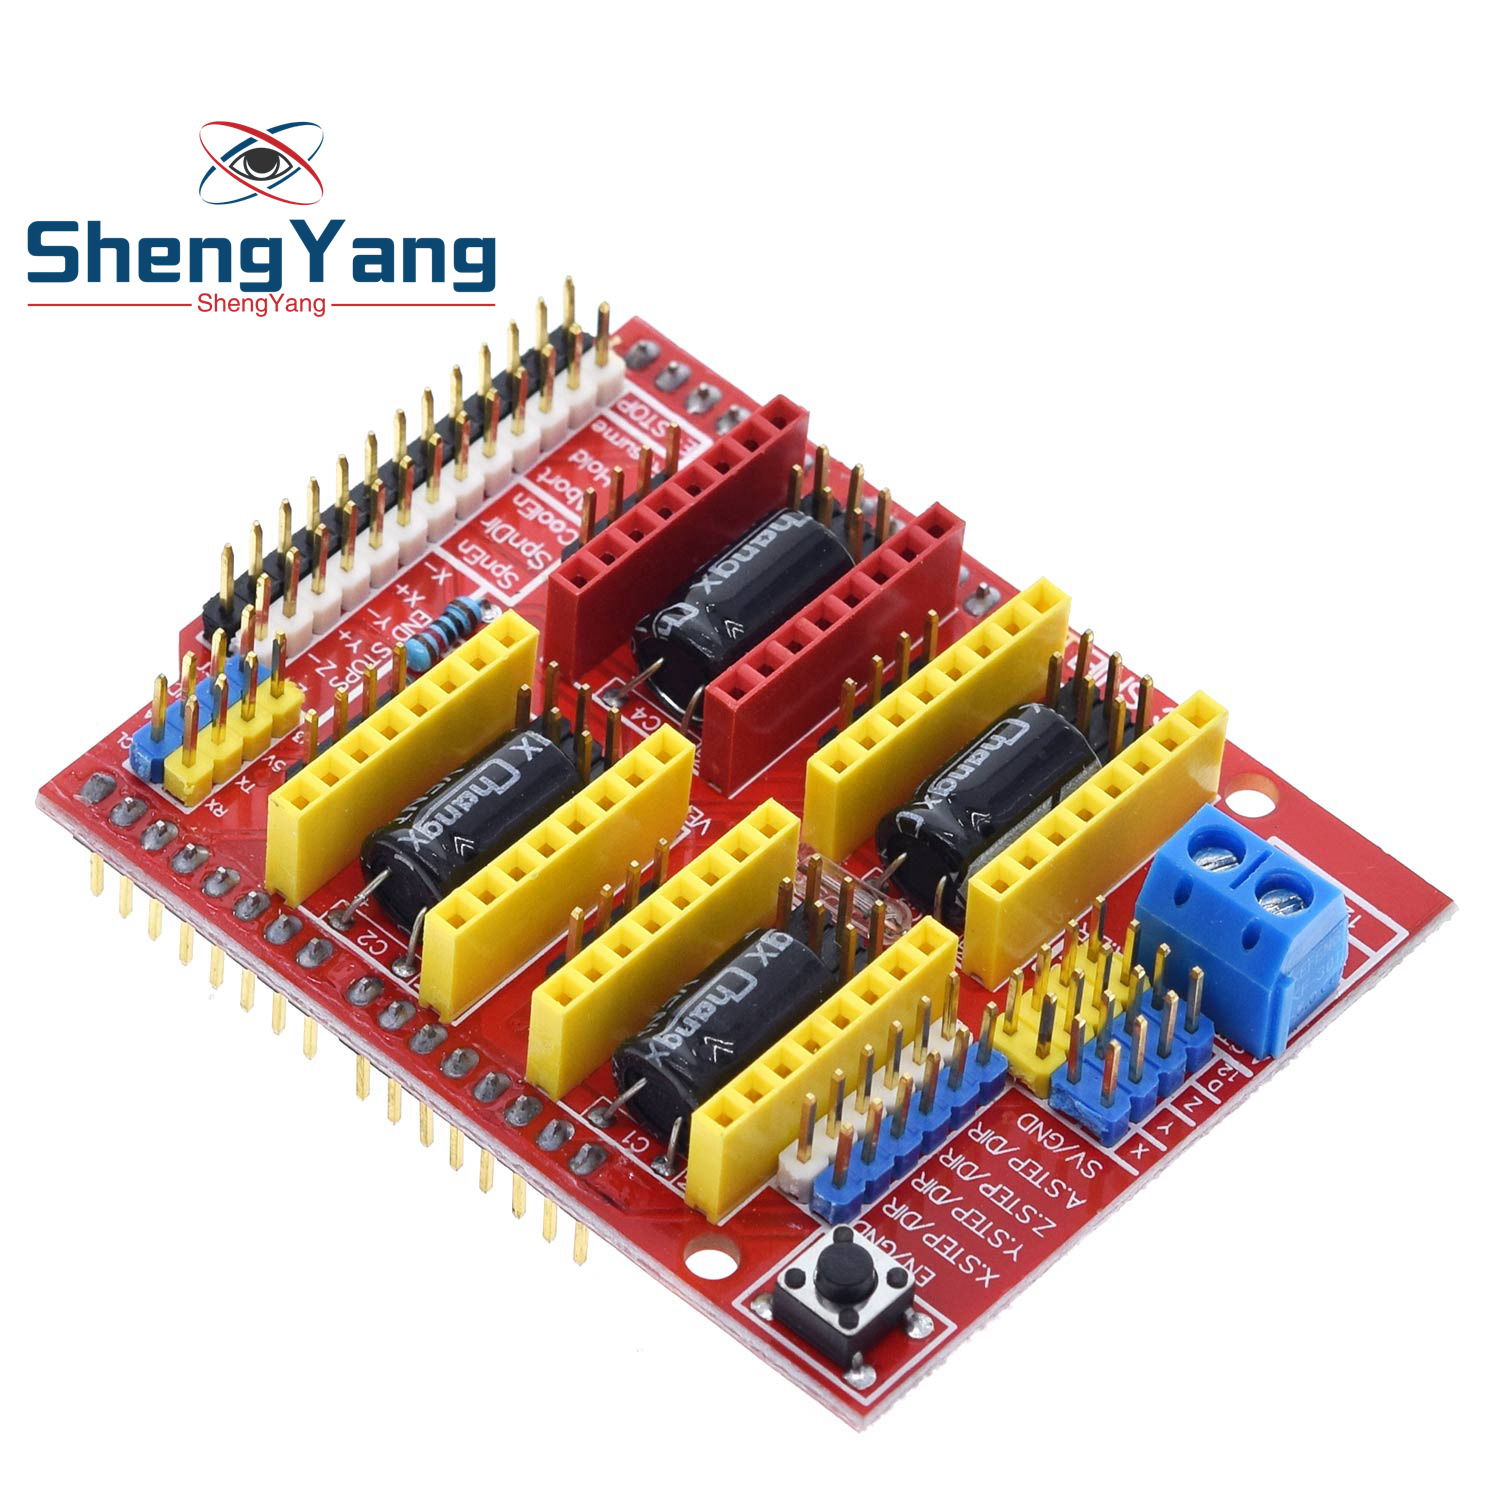 ShengYang New cnc shield v3 engraving machine / 3D Printer / A4988 driver expansion board for Arduino